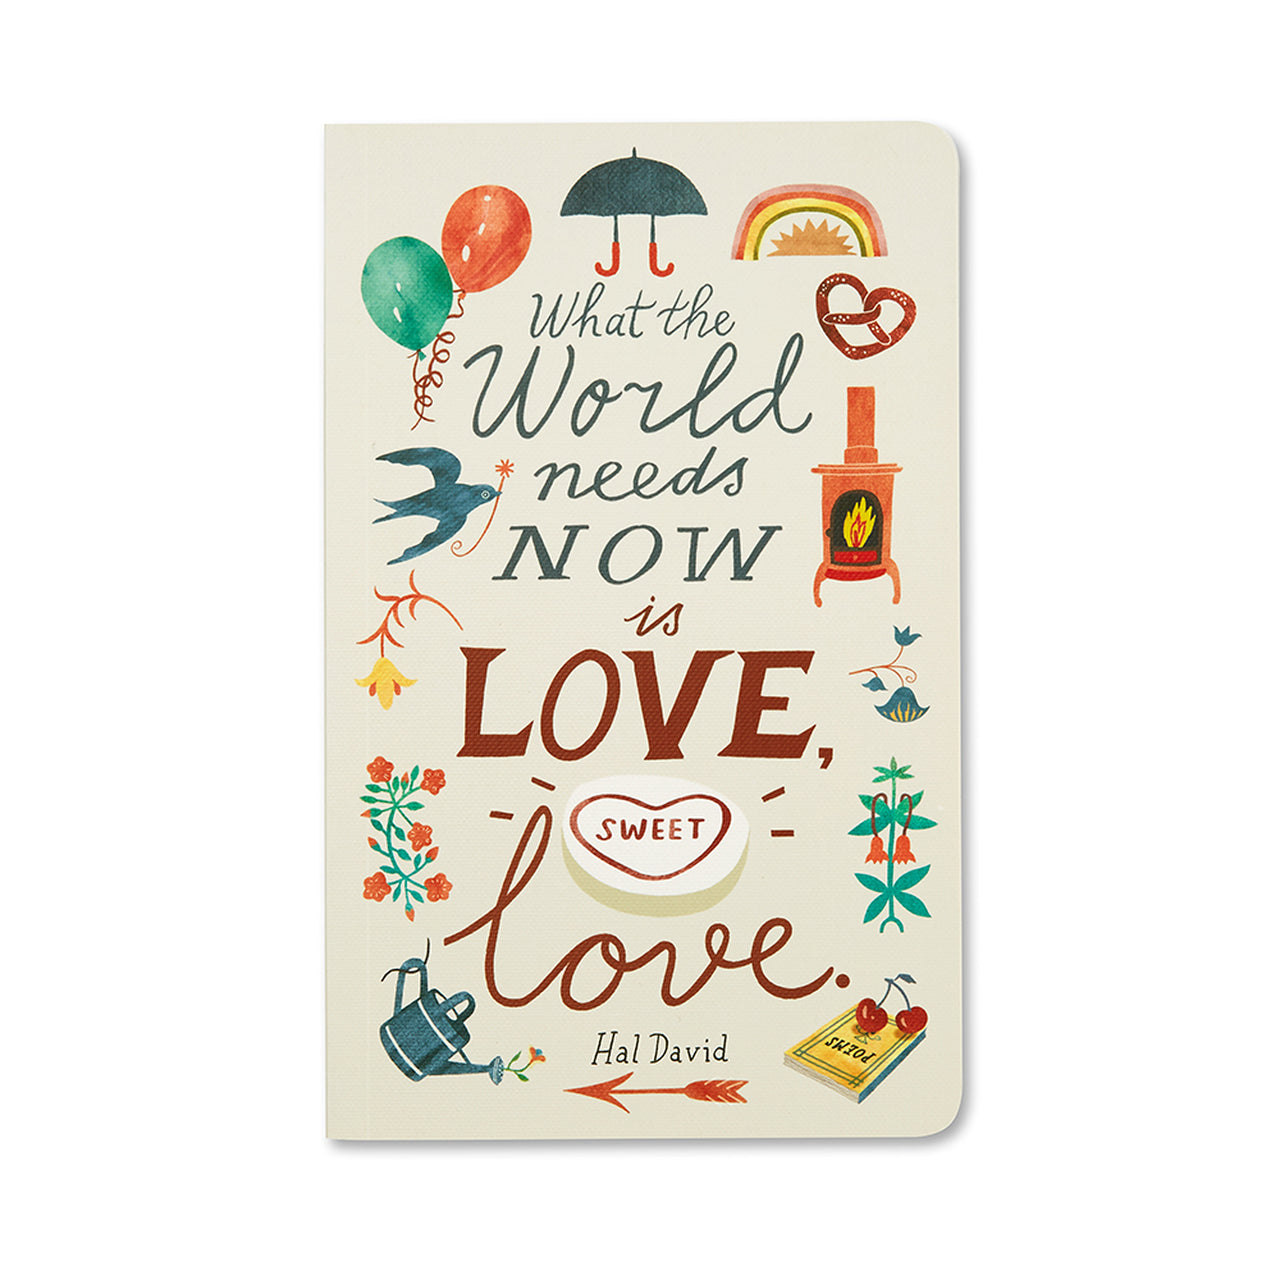 Book "WHAT THE WORLD NEEDS NOW IS LOVE, SWEET LOVE."